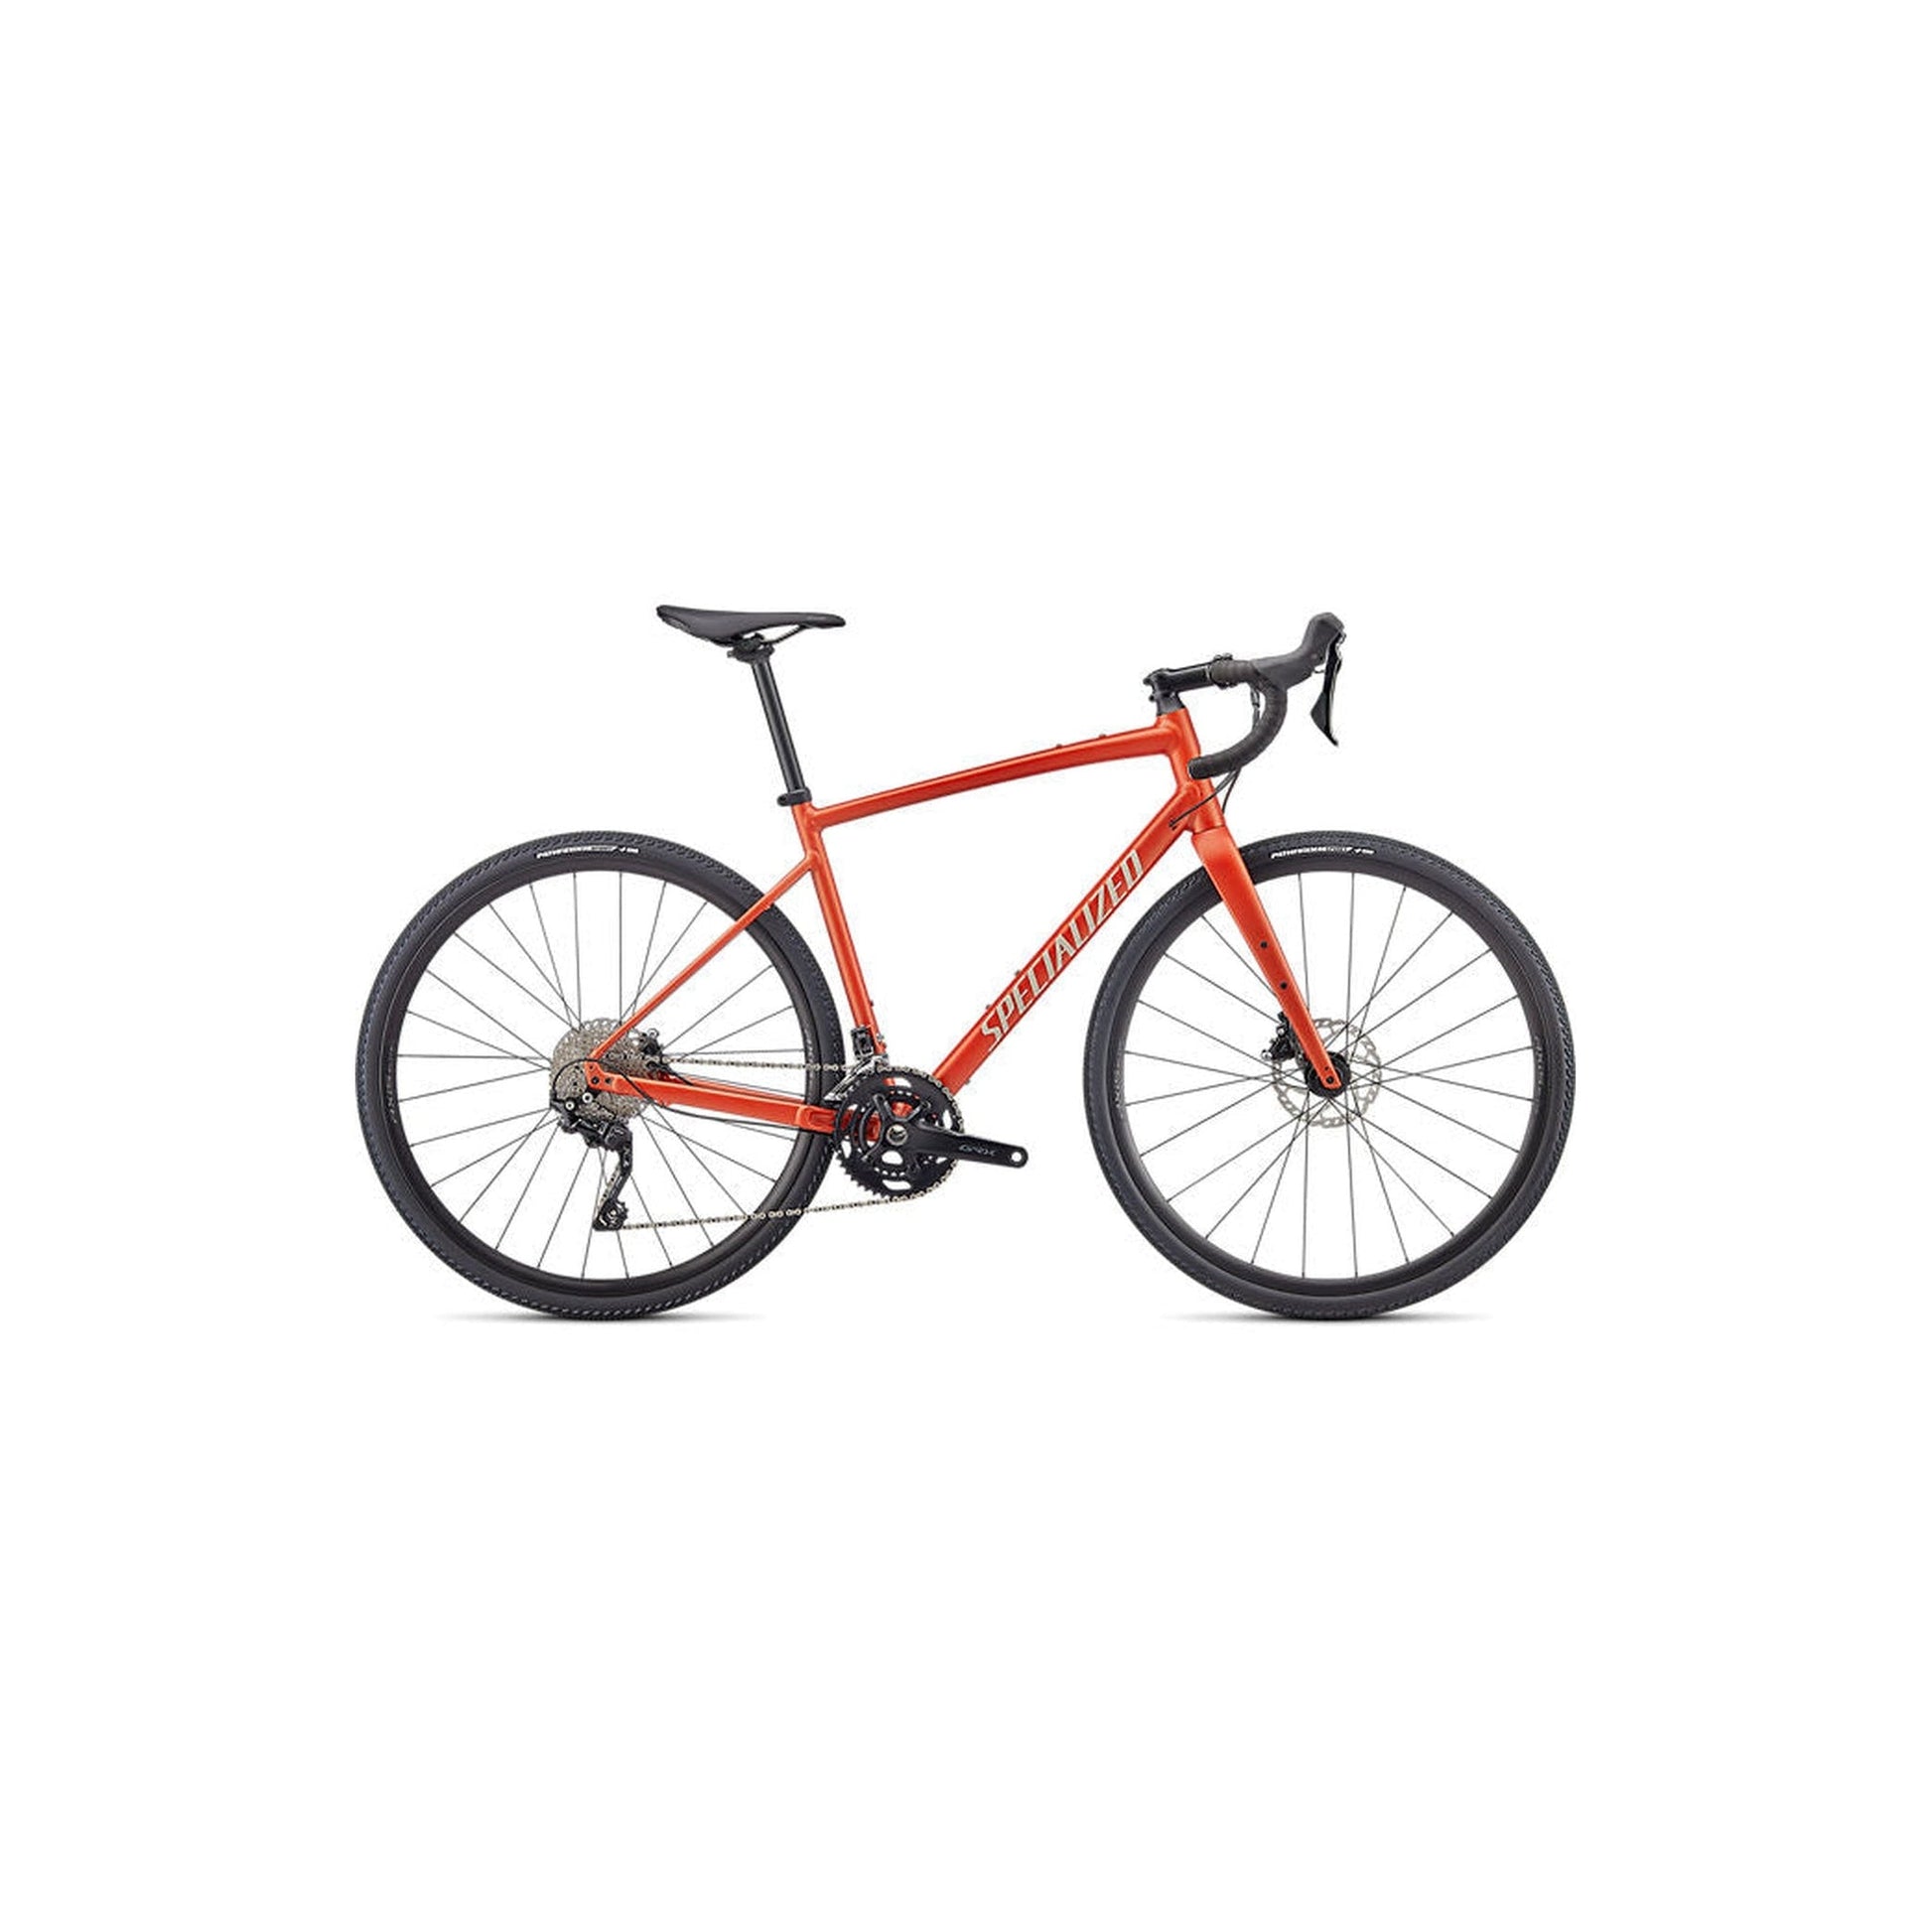 Diverge Elite E5-Cycles Direct Specialized